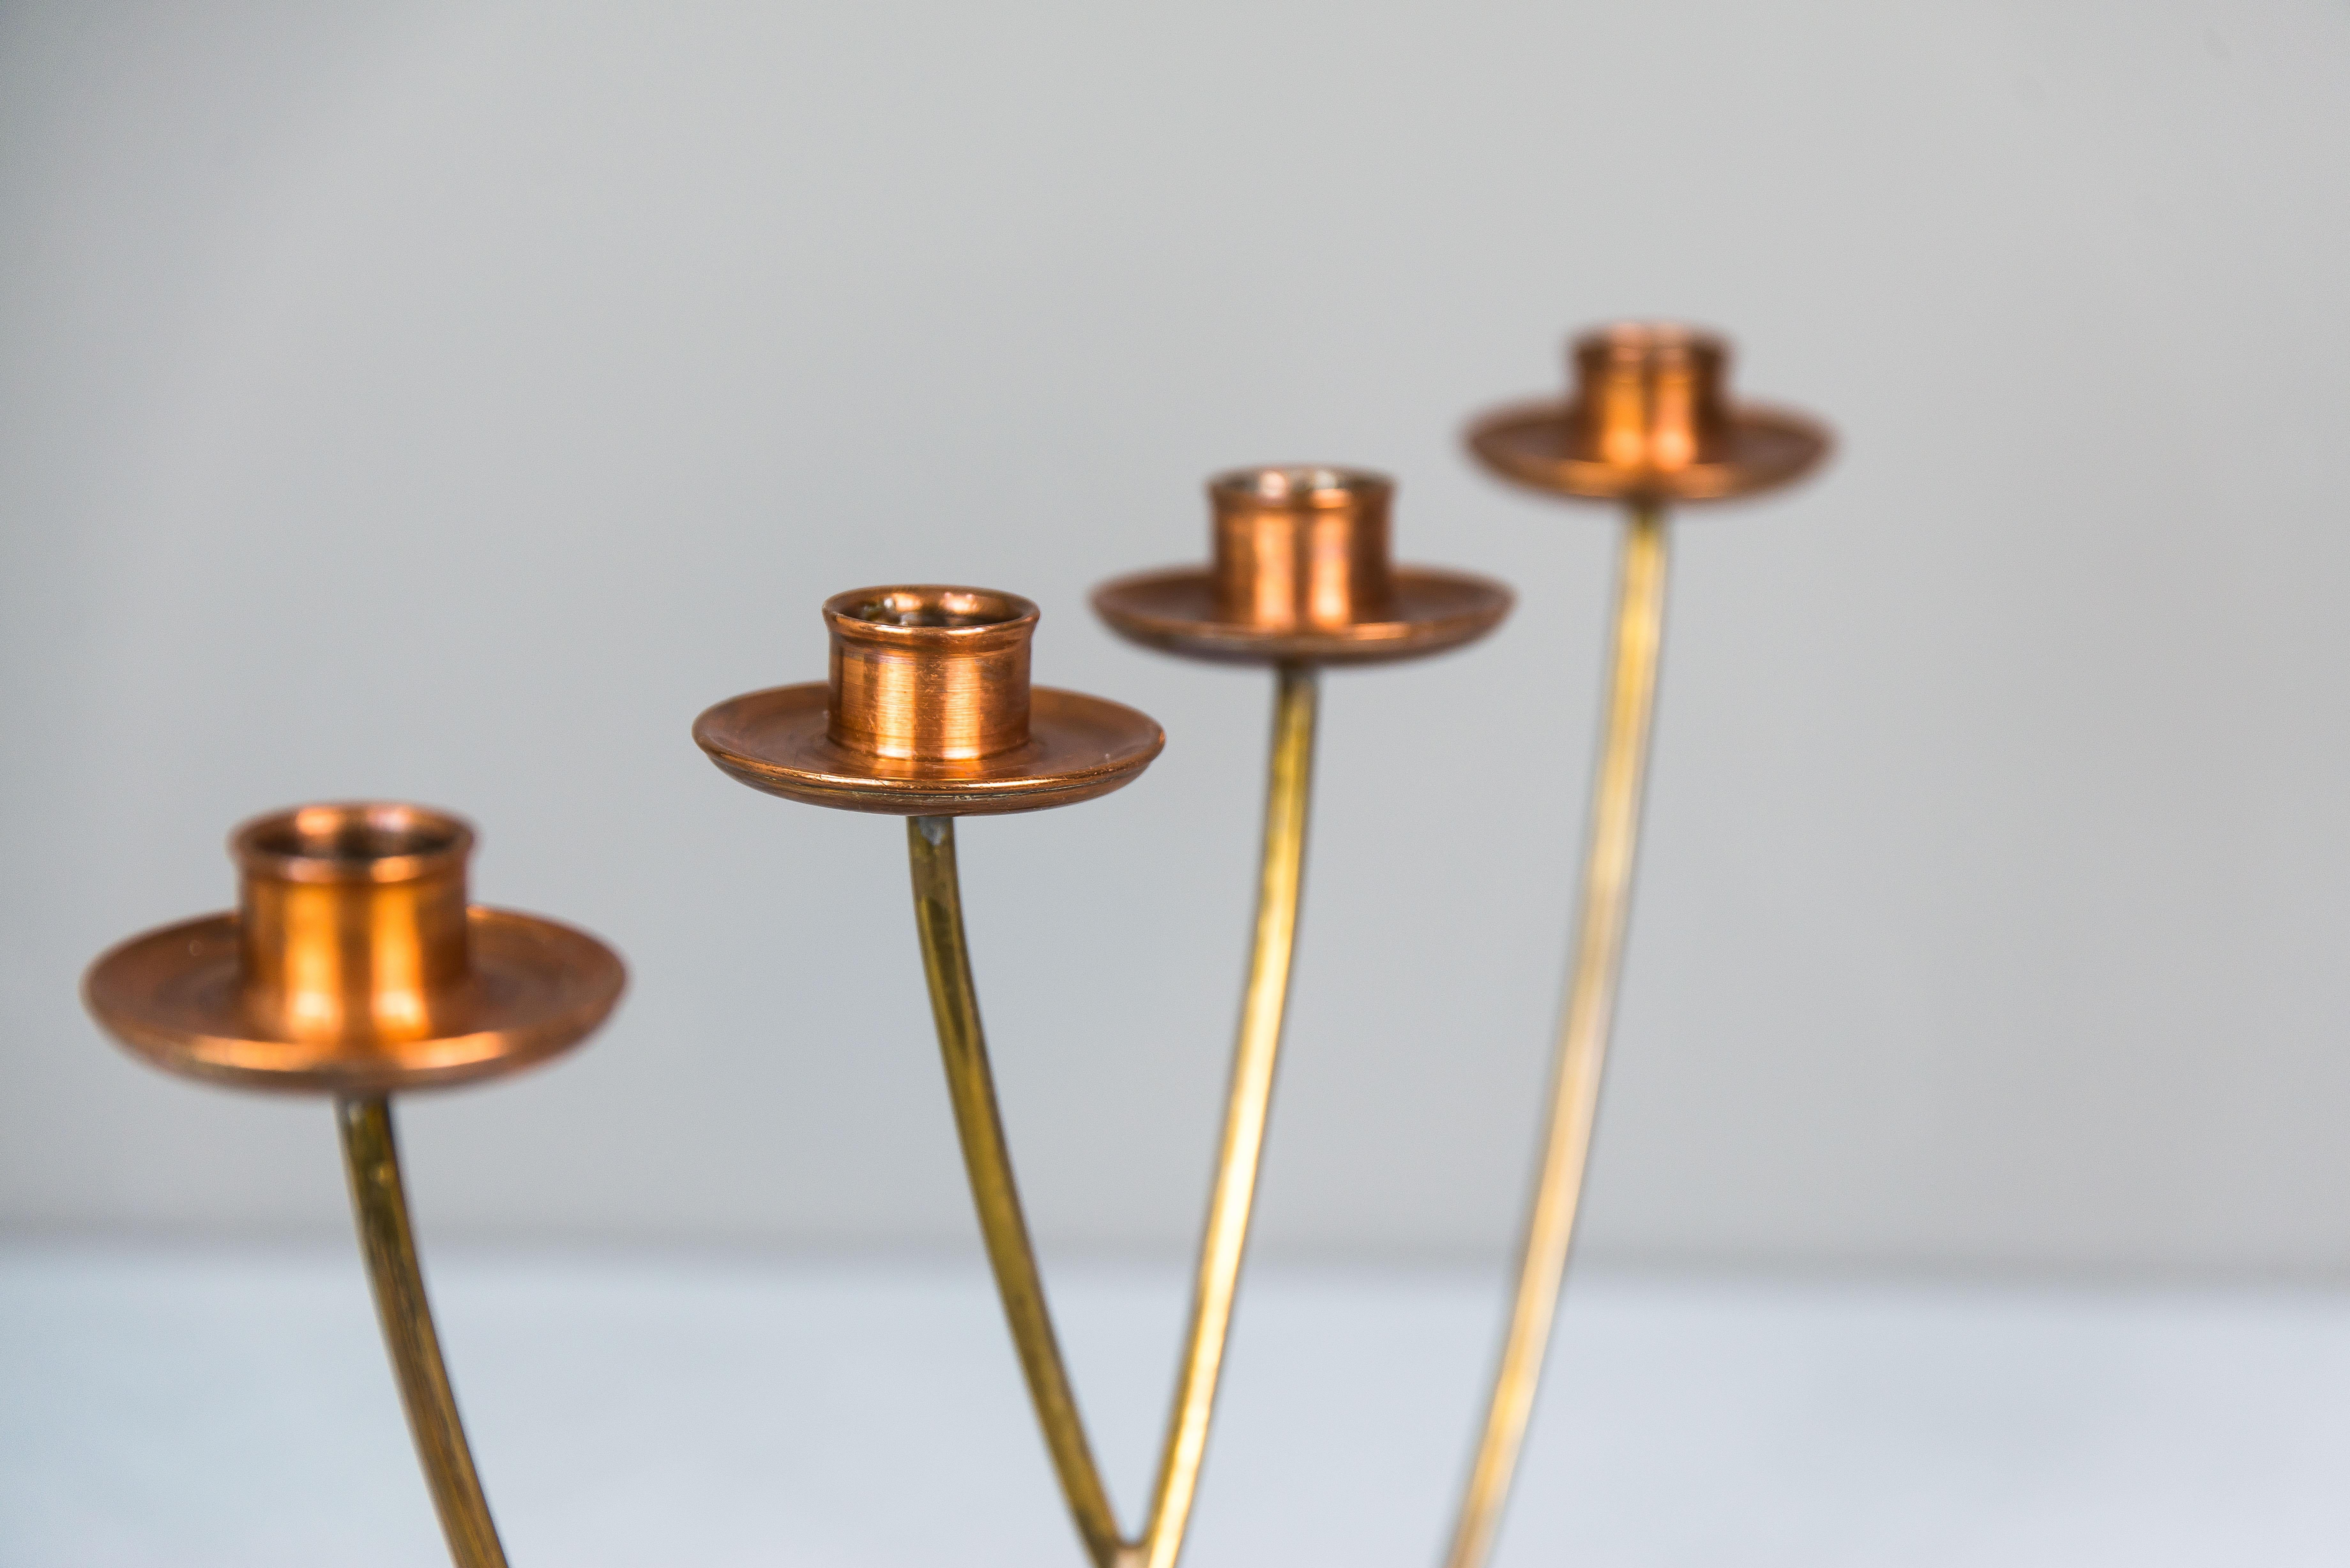 Candleholder for 4 Candles Execution in Copper and Brass, circa 1950s For Sale 2